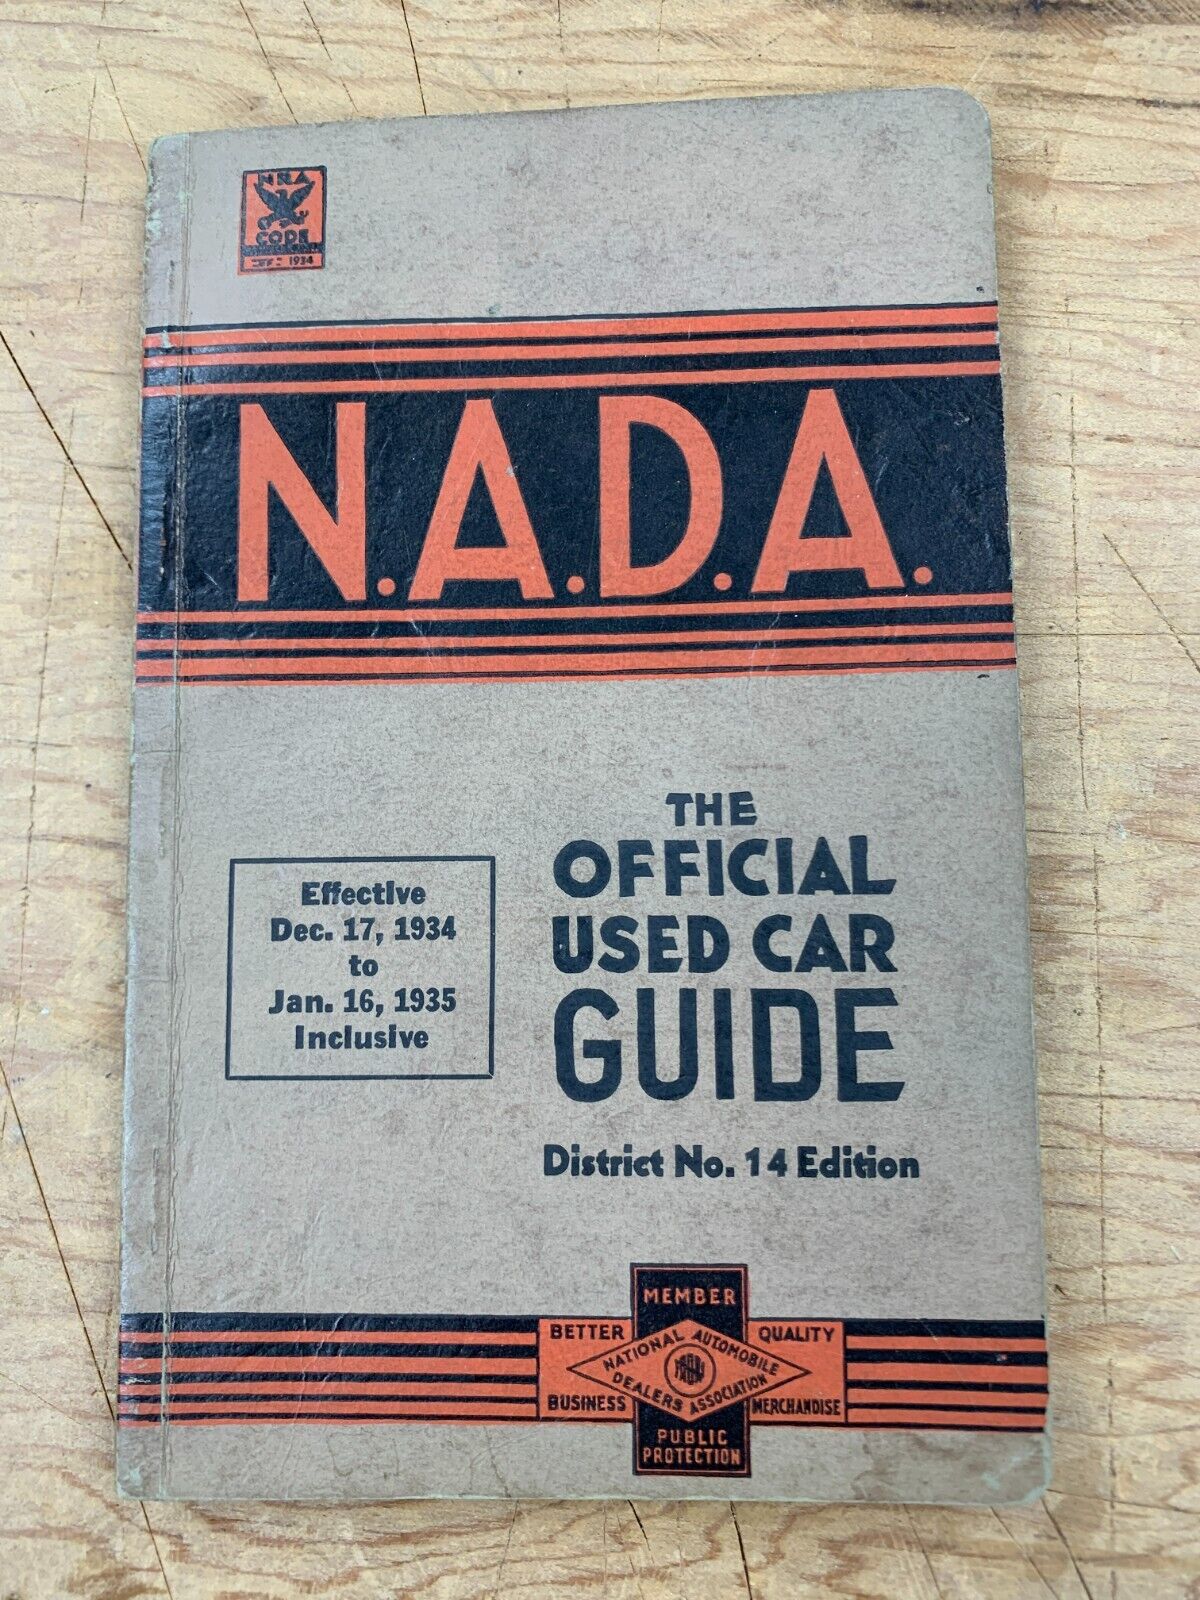 1935 N.A.D.A. official used car guide, District 14